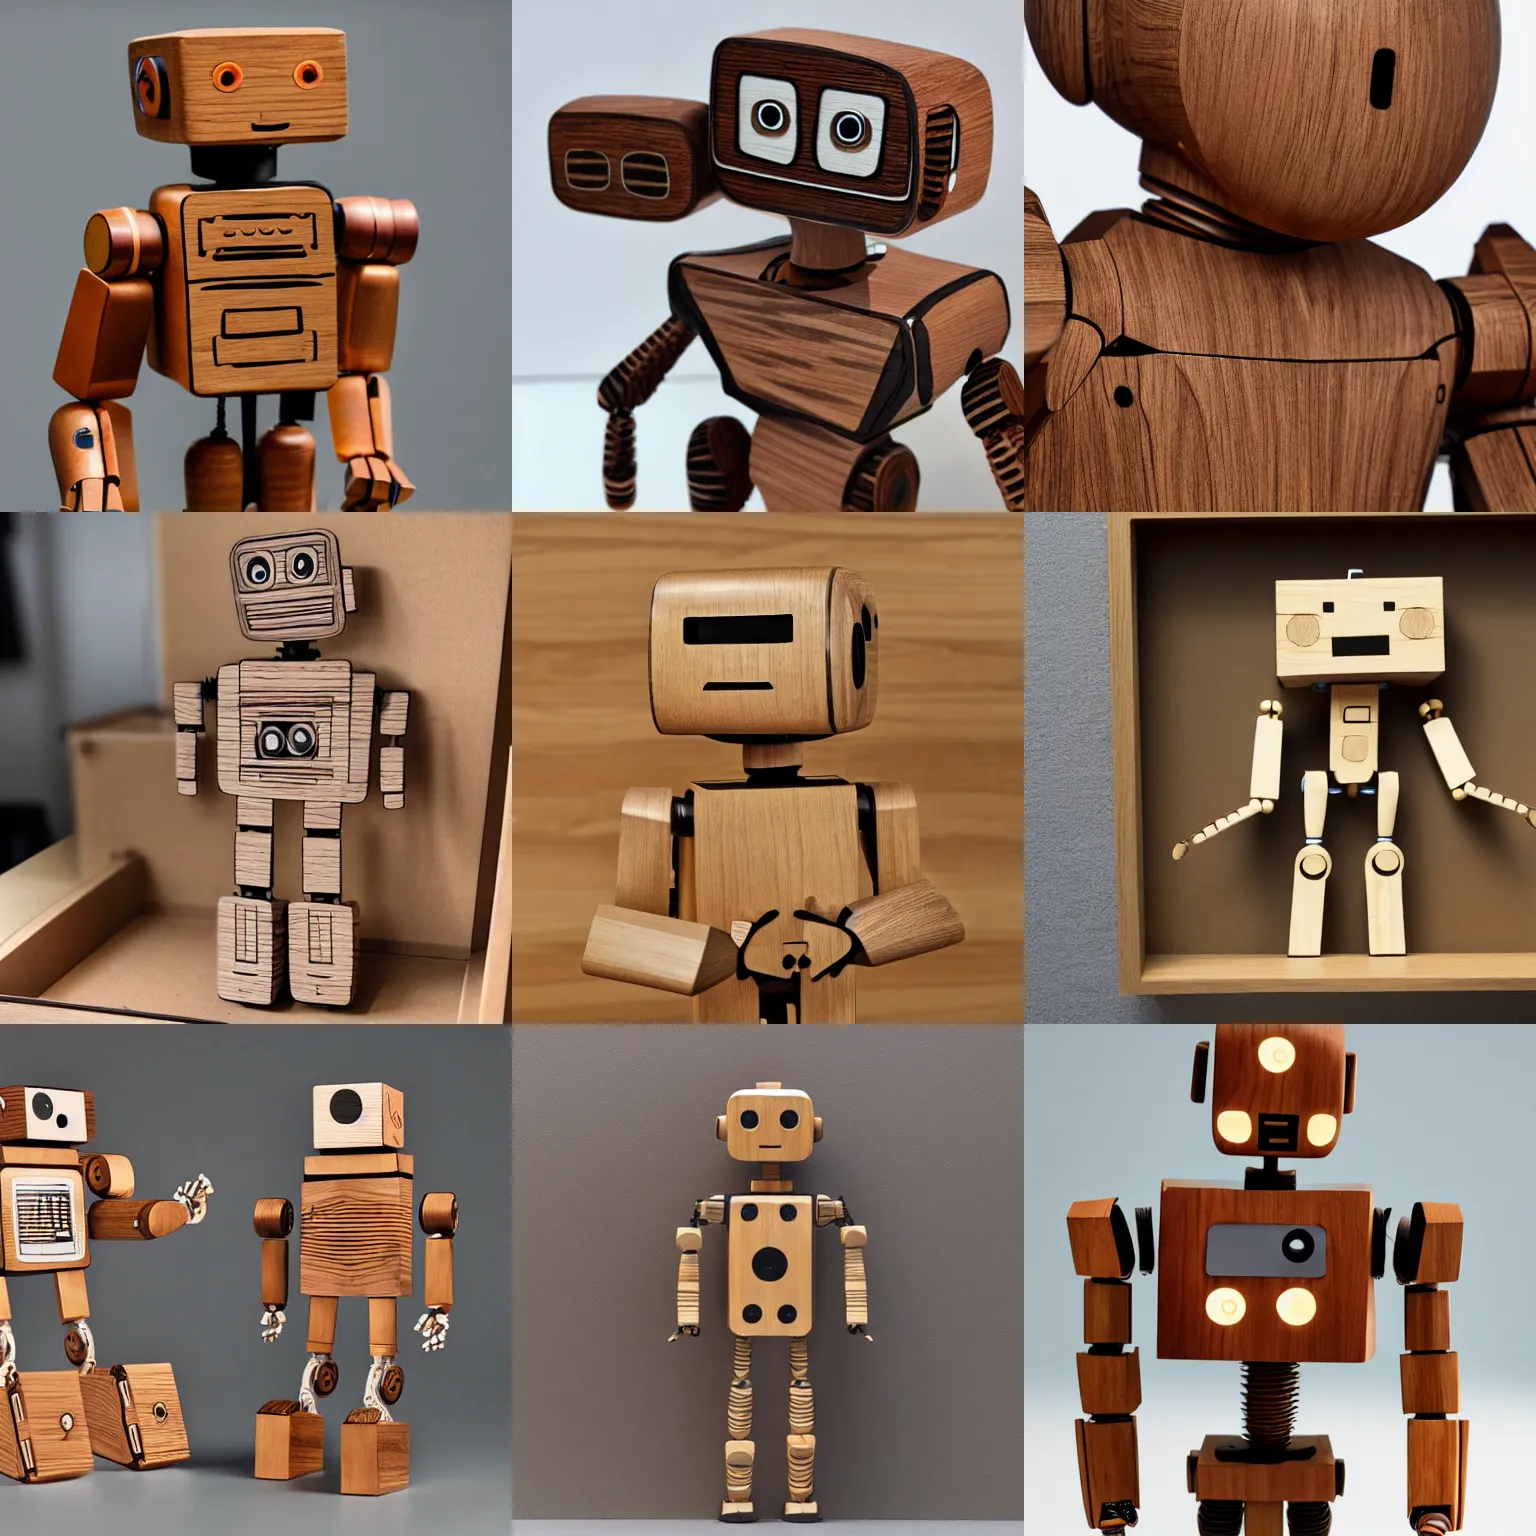 Prompt: meticulously detailed wooden figure of a self - aware robot